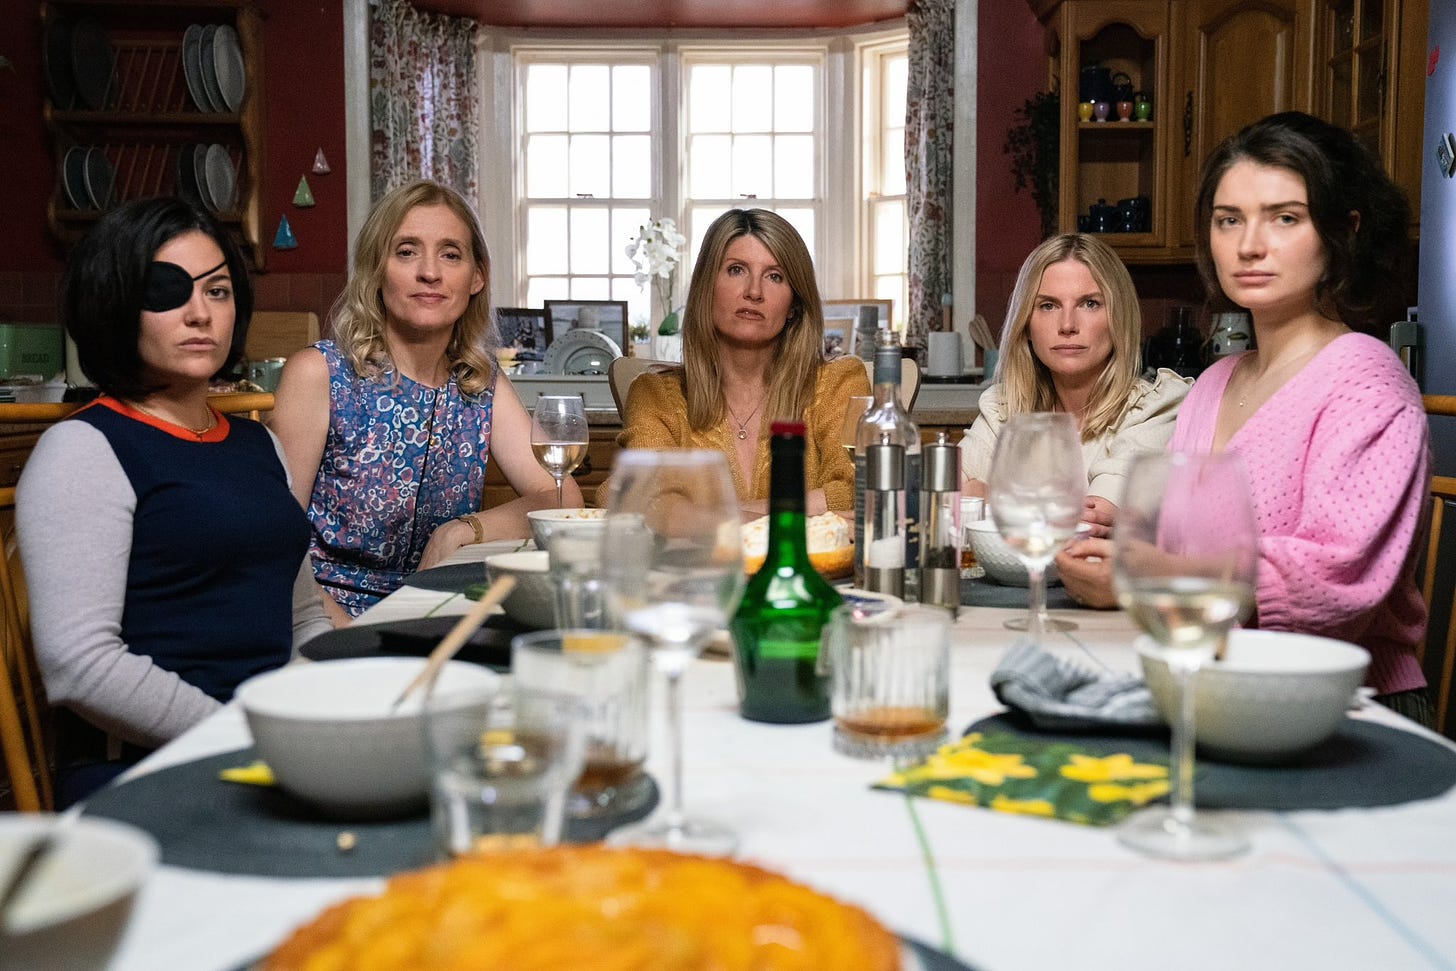 The 5 sisters from Bad Sisters sit at a kitchen table looking expressionless at the camera. Sharon Horgan (Eva) is at the head of the table with 2 sisters flanking her on each side.